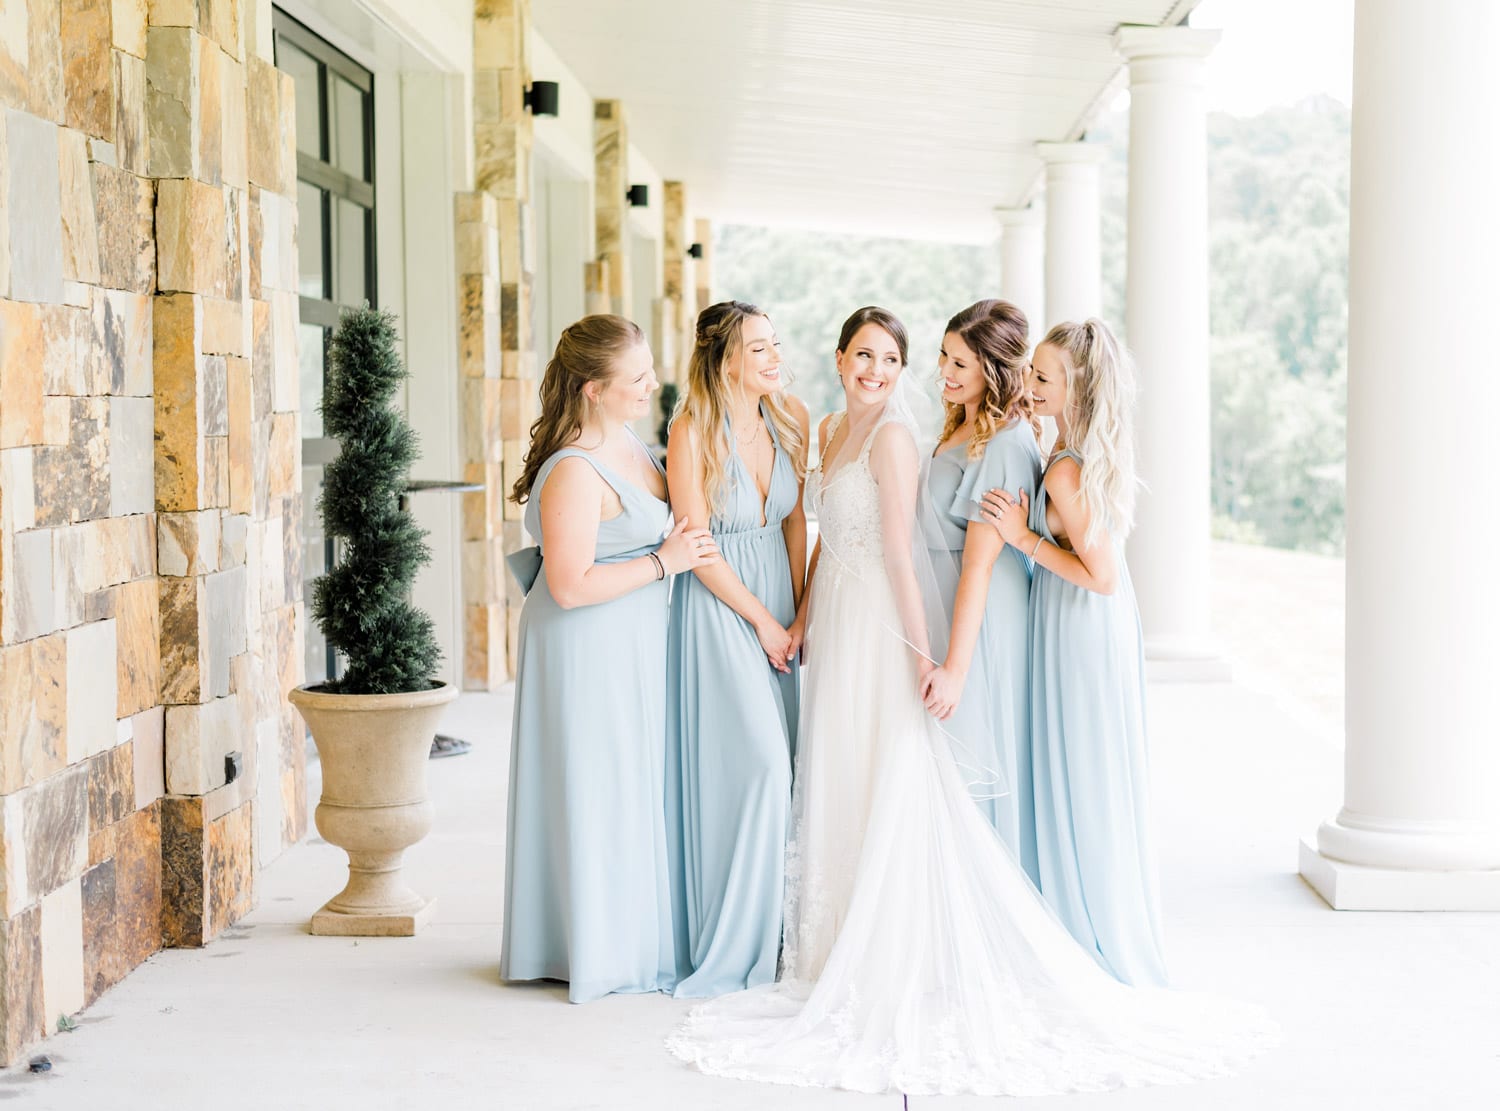 Bride and bridesmaids standing on porch